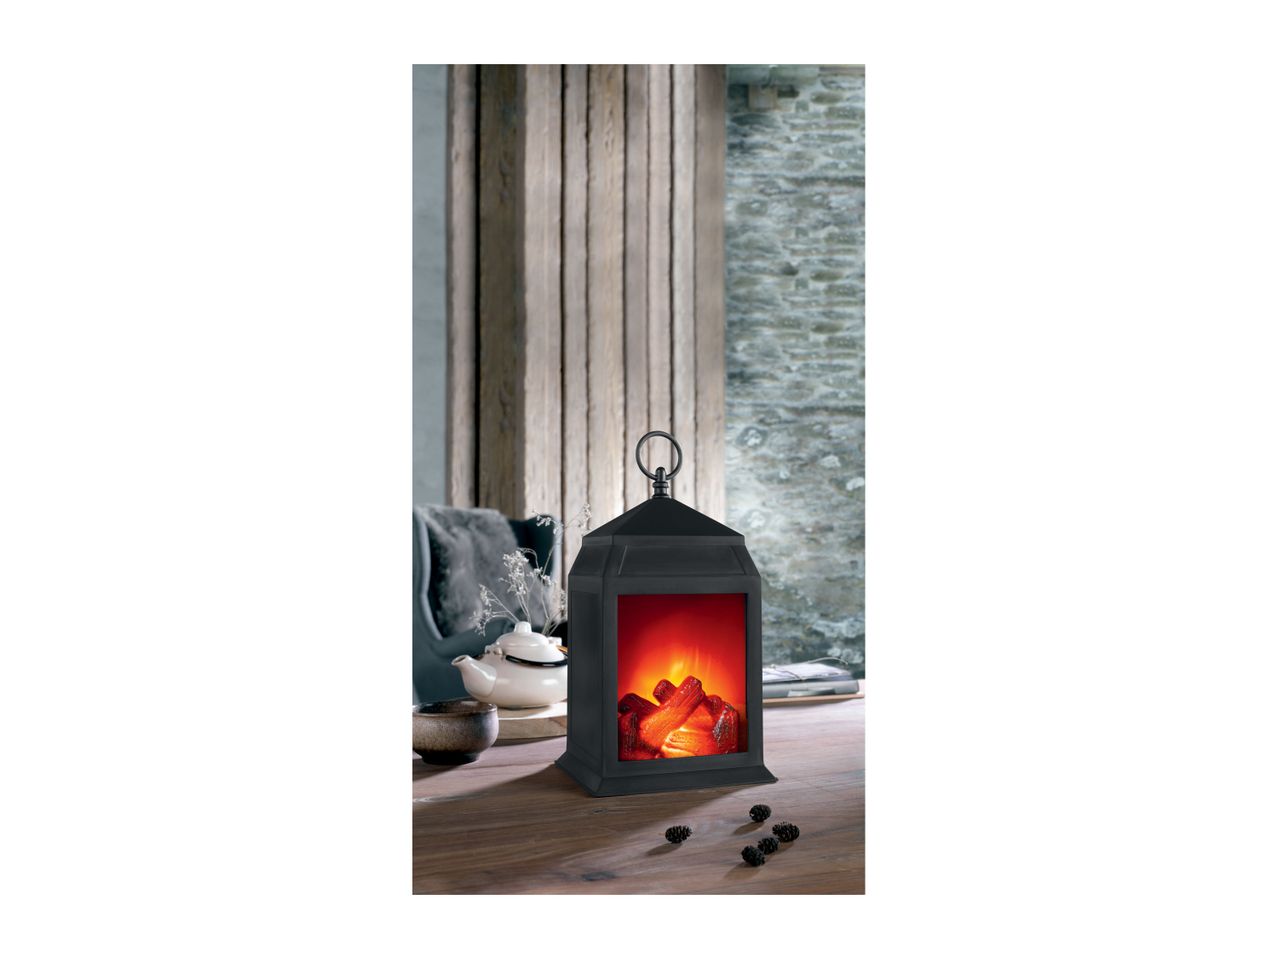 Go to full screen view: Livarno Home Battery Operated LED Fireplace Style Lantern - Image 8